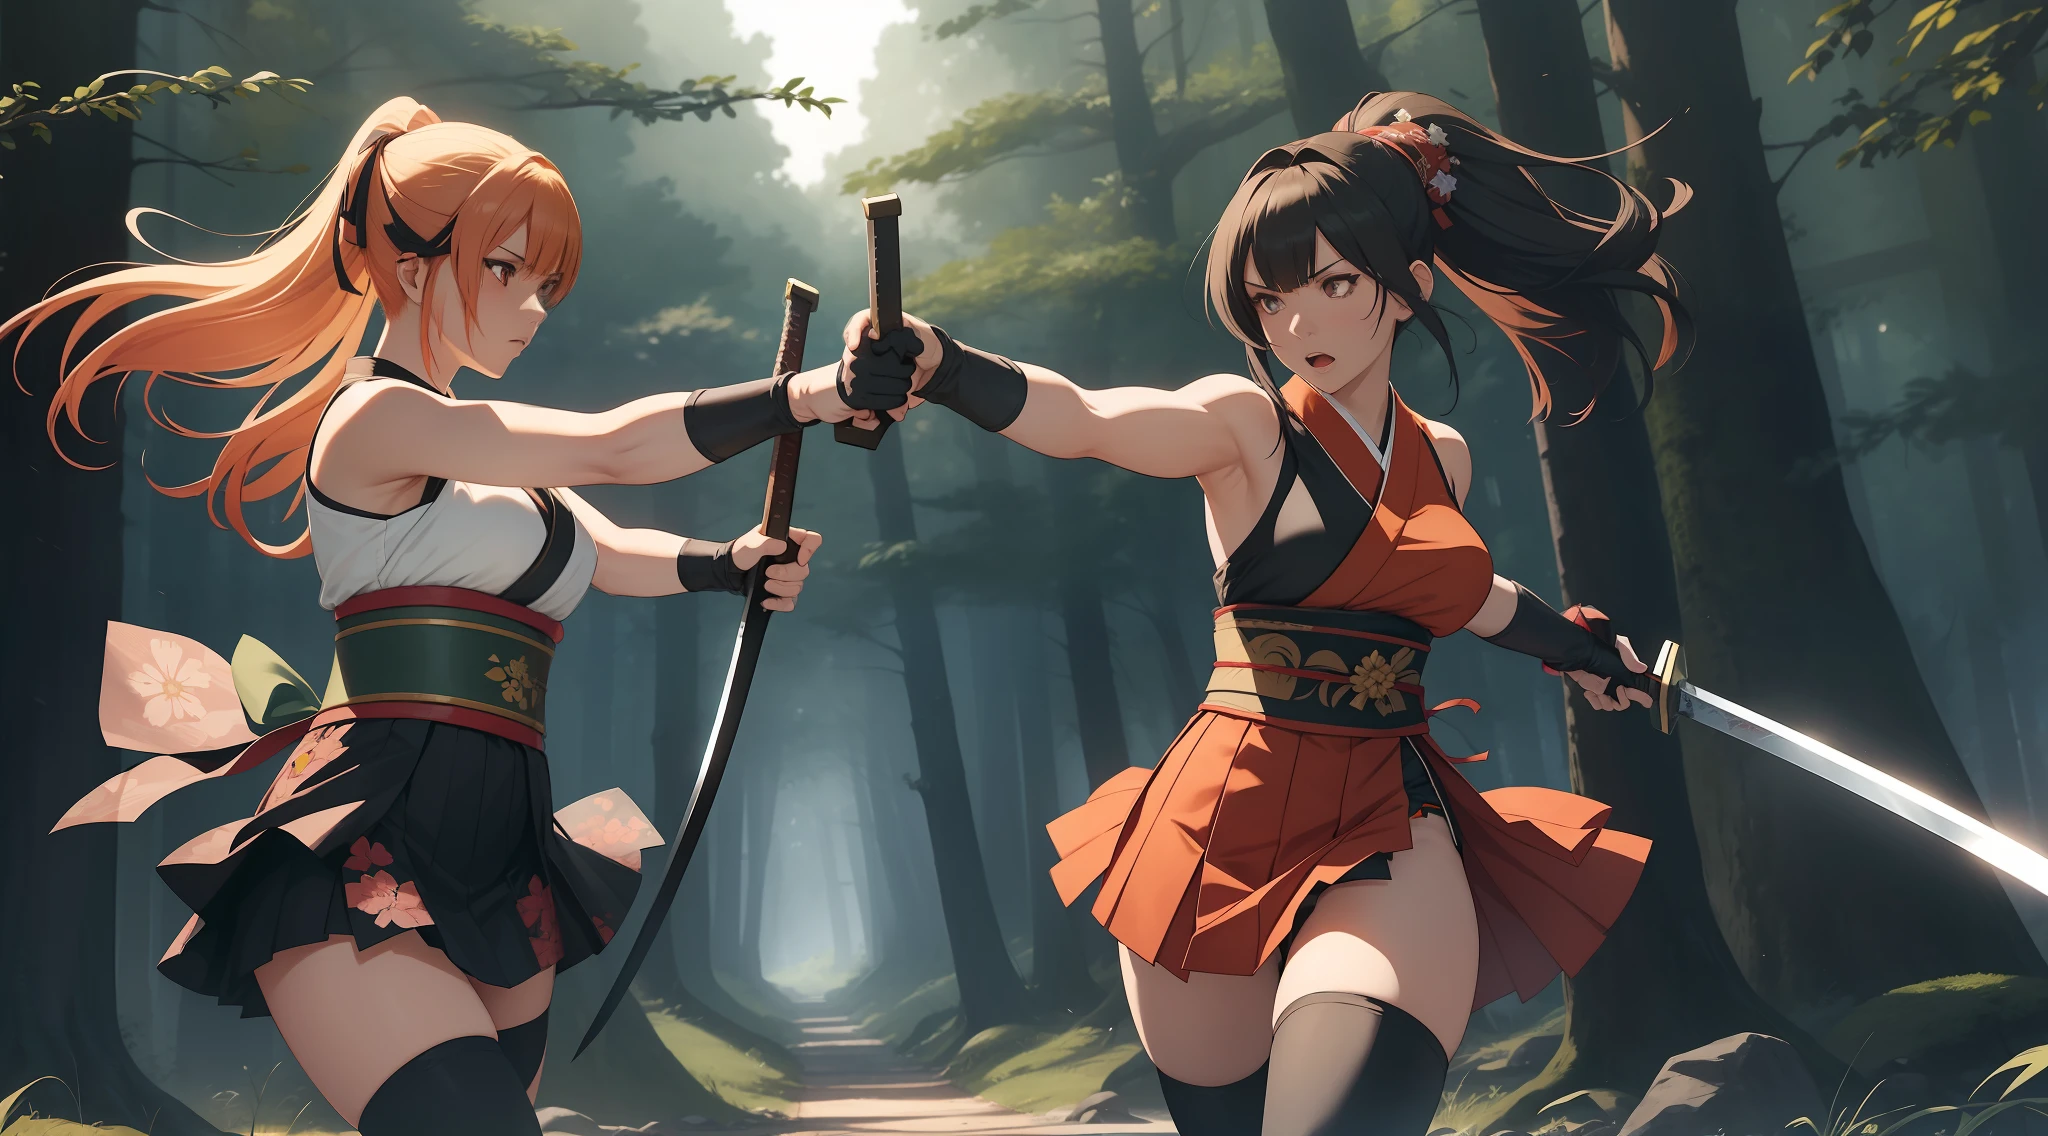 Full body shot of two female character from Dead or Alive games, with serious expression, fighting 1 versus 1 in a fierce duel death match with short swords weapon. One of them take lethal slash and wounded. They have long loose hairstyle. They are wearing different color of traditional sleeveless kimono, with a floral print skirt, an obi tied on back hip. Both of them are wearing a pair of long black elbow gloves, a pair of 100% black thigh highs, and black shoes. Background set in a dark forest.